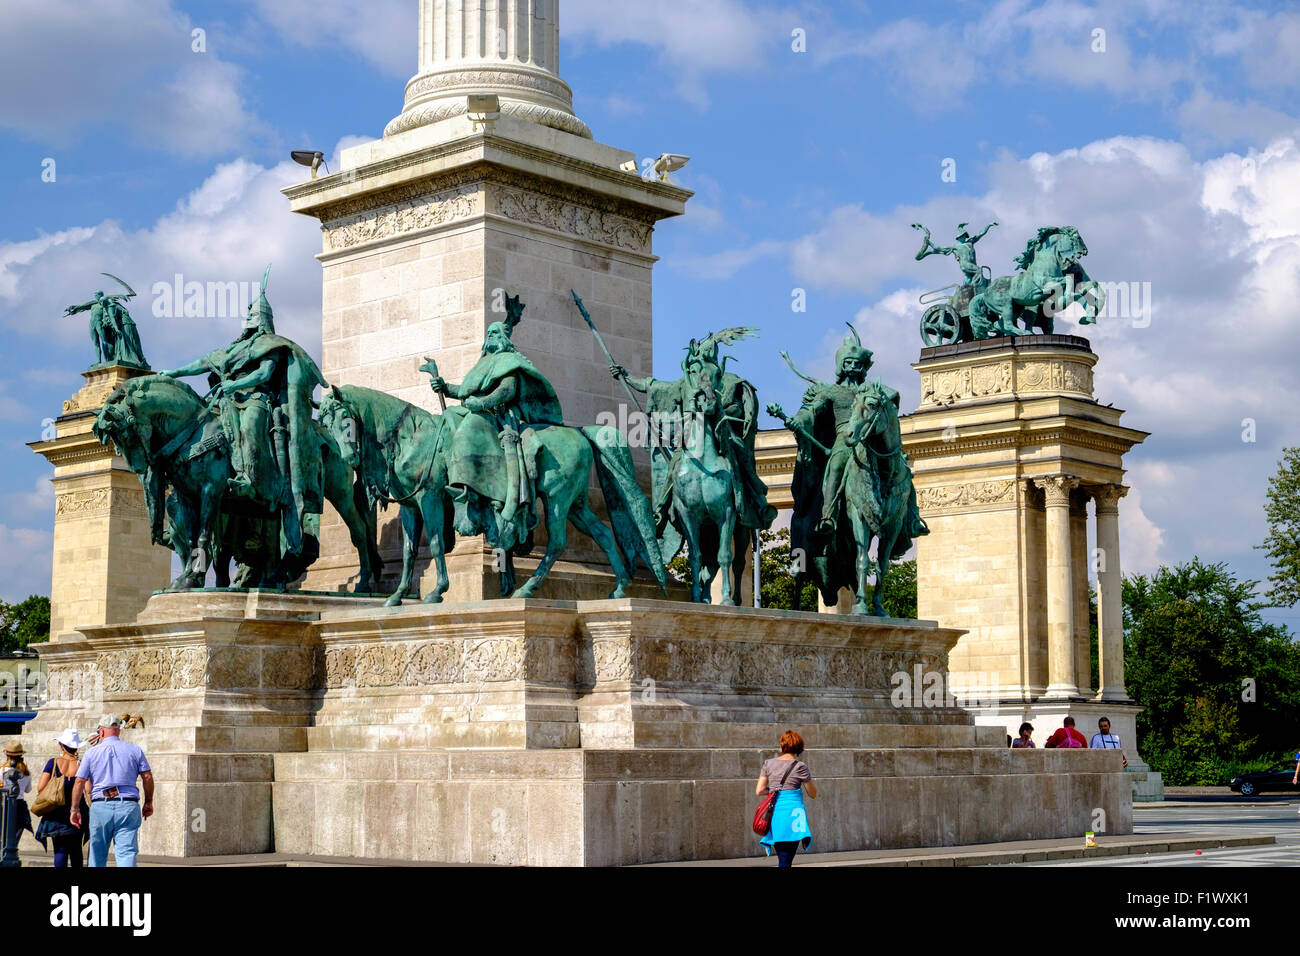 Millennium Monument, Heroes Square, Budapest, Hungary Europe. Statues of seven mounted Magyar chieftains around base of column Stock Photo